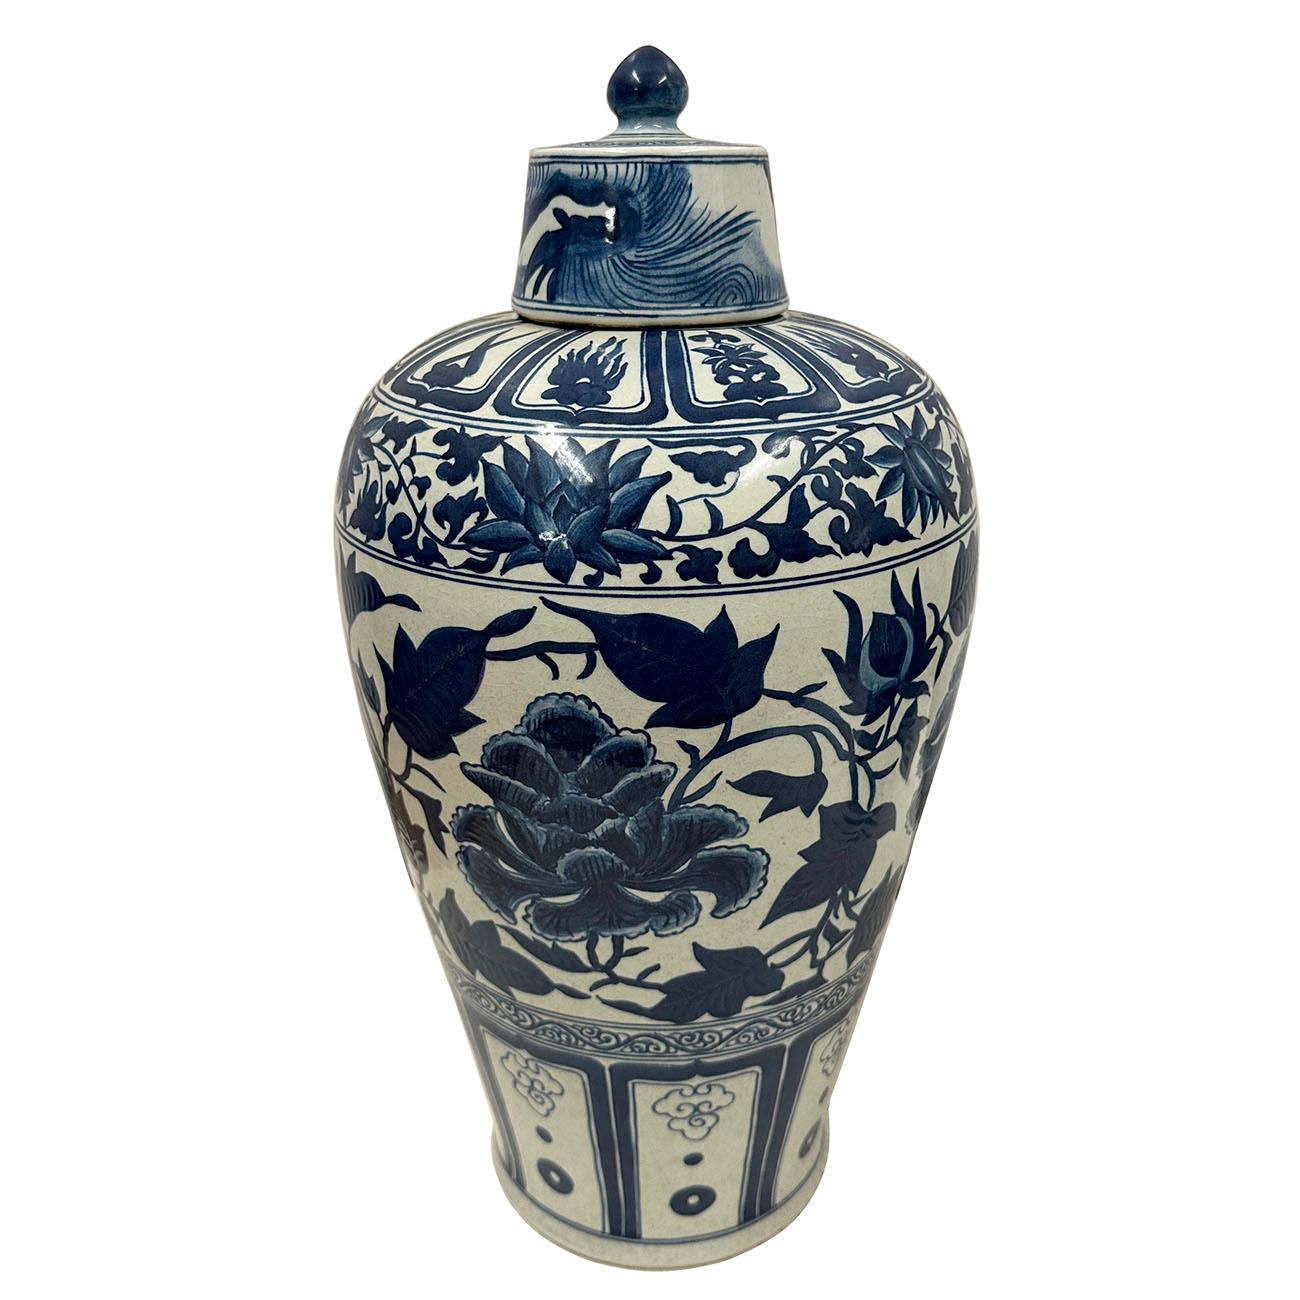 An exquisite pair of Chinese porcelain lidded vases, in Ginger Jar shape and beautifully hand-painted with a traditional decoration of Peony flower on the lid and body. This magnificent Chinese Blue and White porcelain vases were hand made and hand